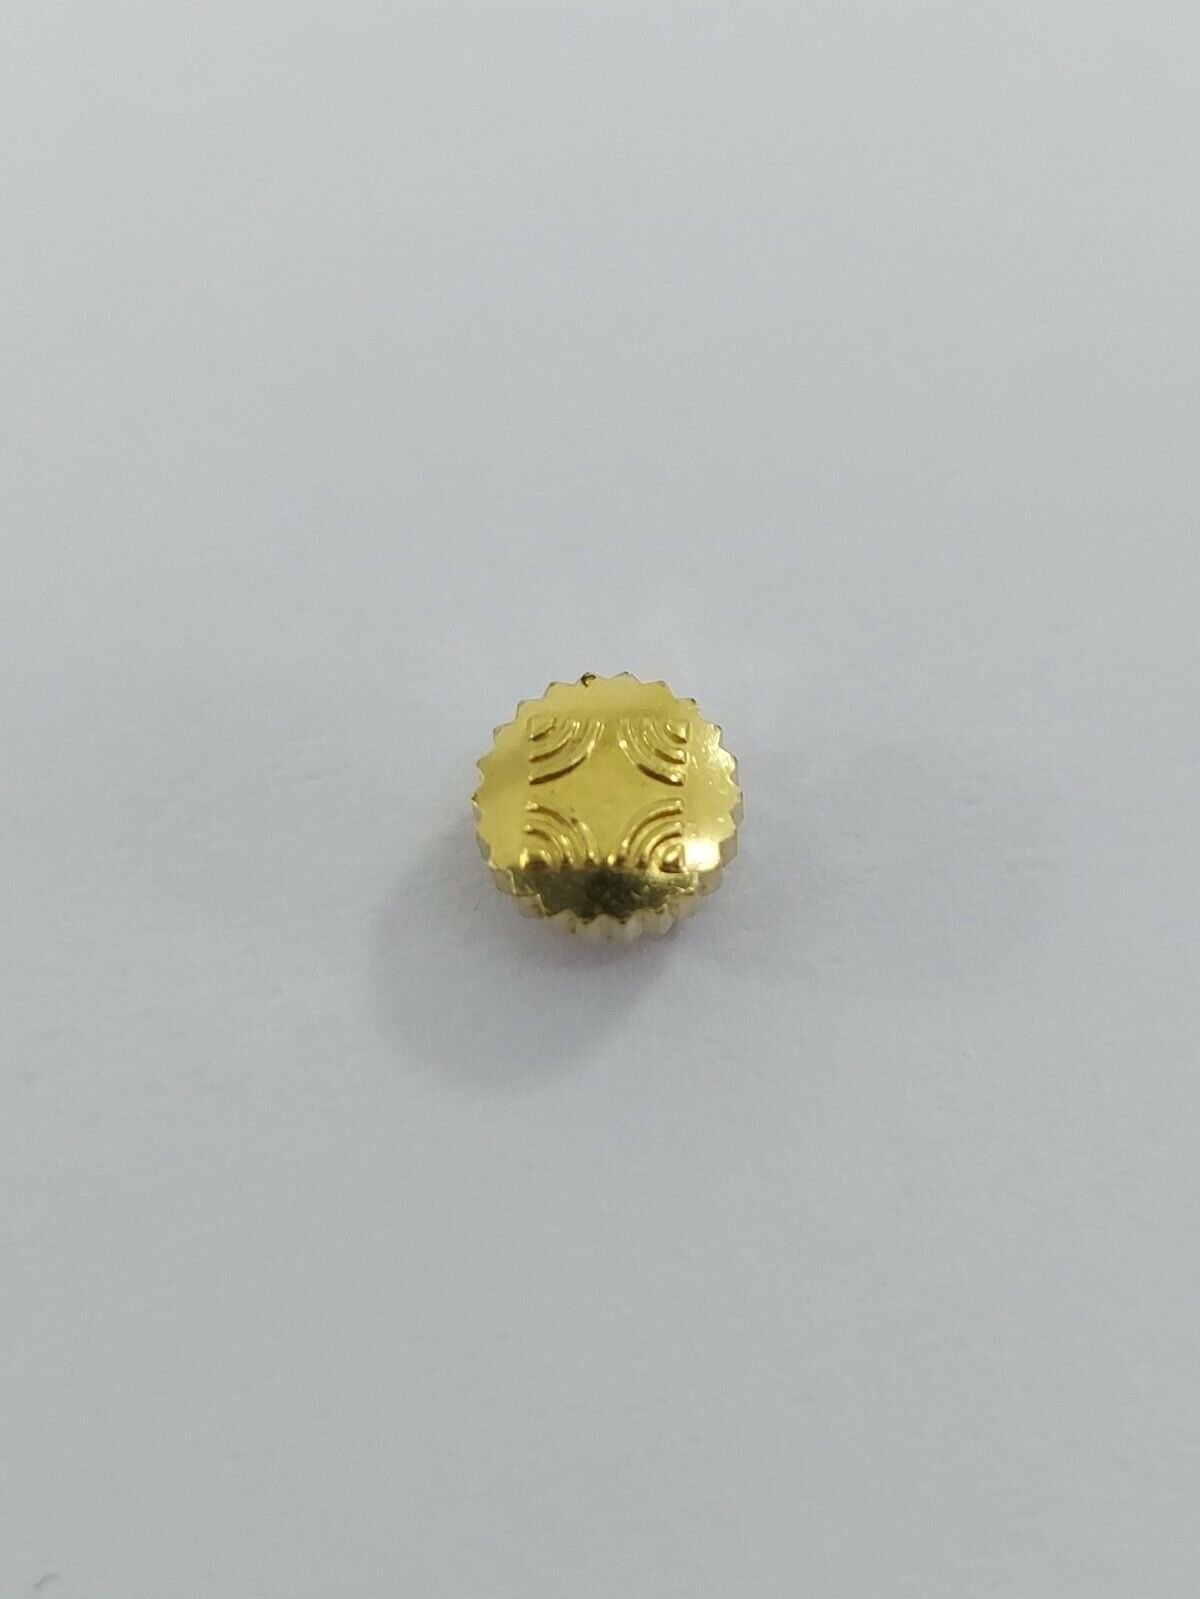 GENUINE ZENITH CROWN GOLD PLATED 4.4mm AUTHENTIC 100% eBay